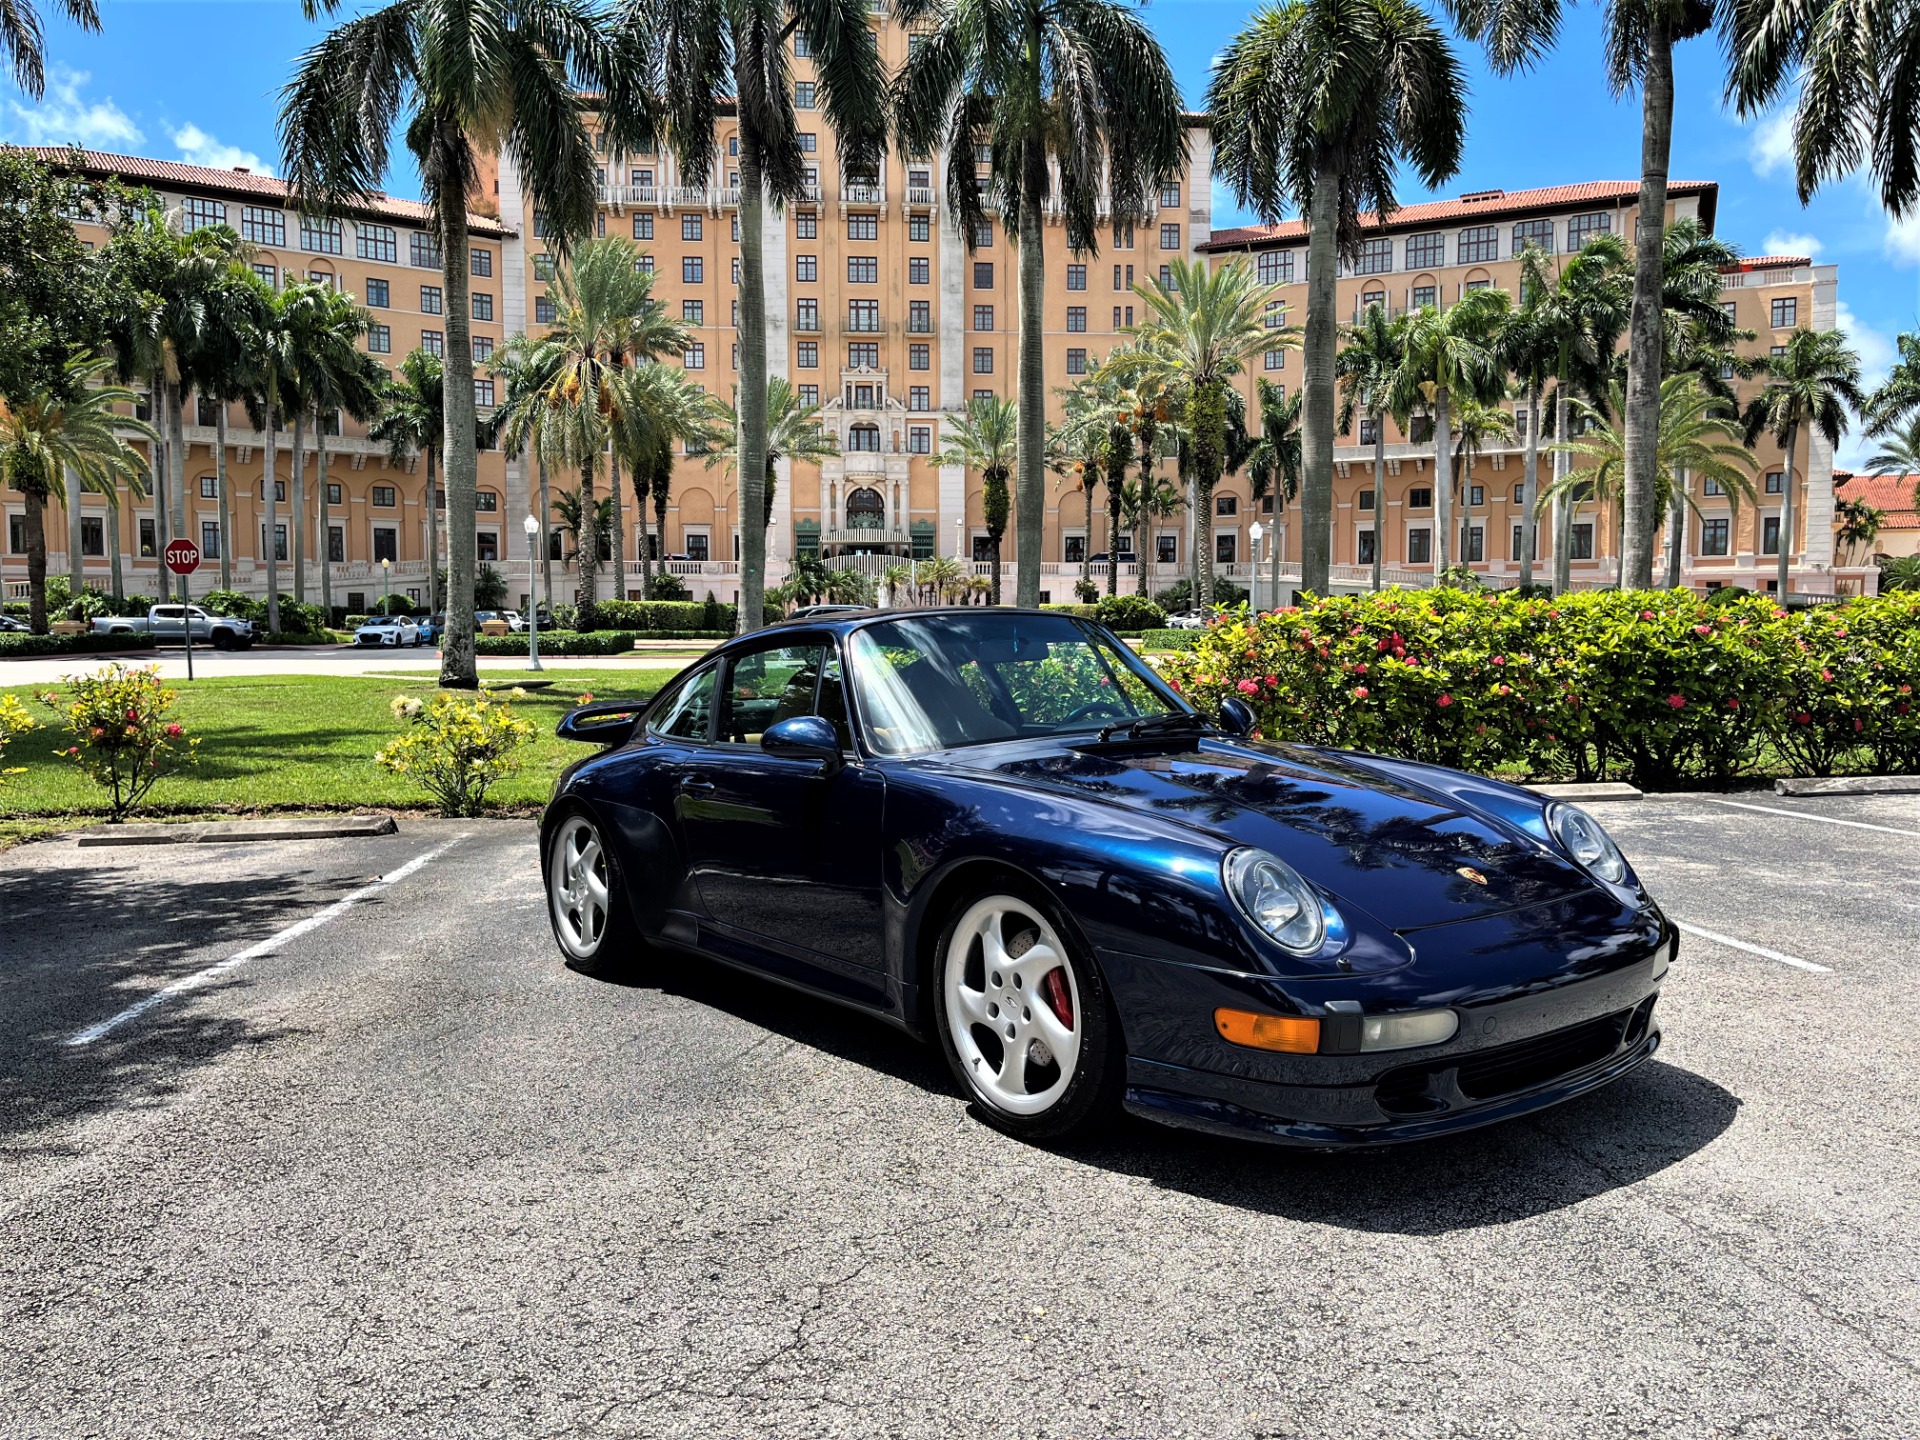 Used 1998 Porsche 911 Carrera 4S for sale Sold at The Gables Sports Cars in Miami FL 33146 1